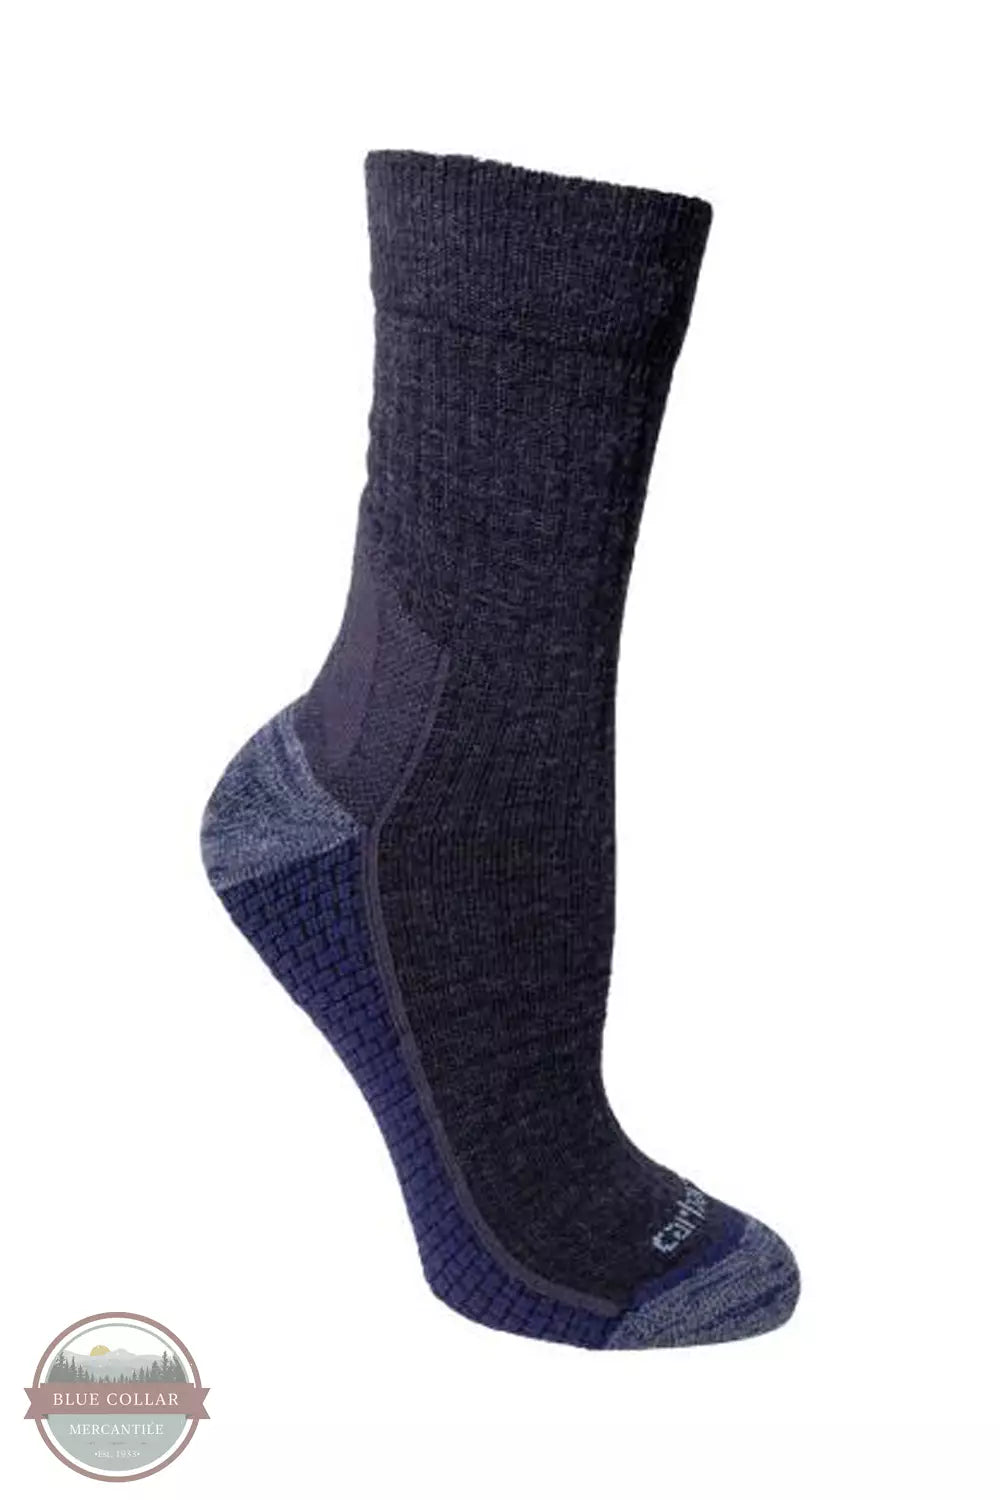 Carhartt SS9260W Ladies Force Grid Midweight Wool Blend Crew Socks Front View